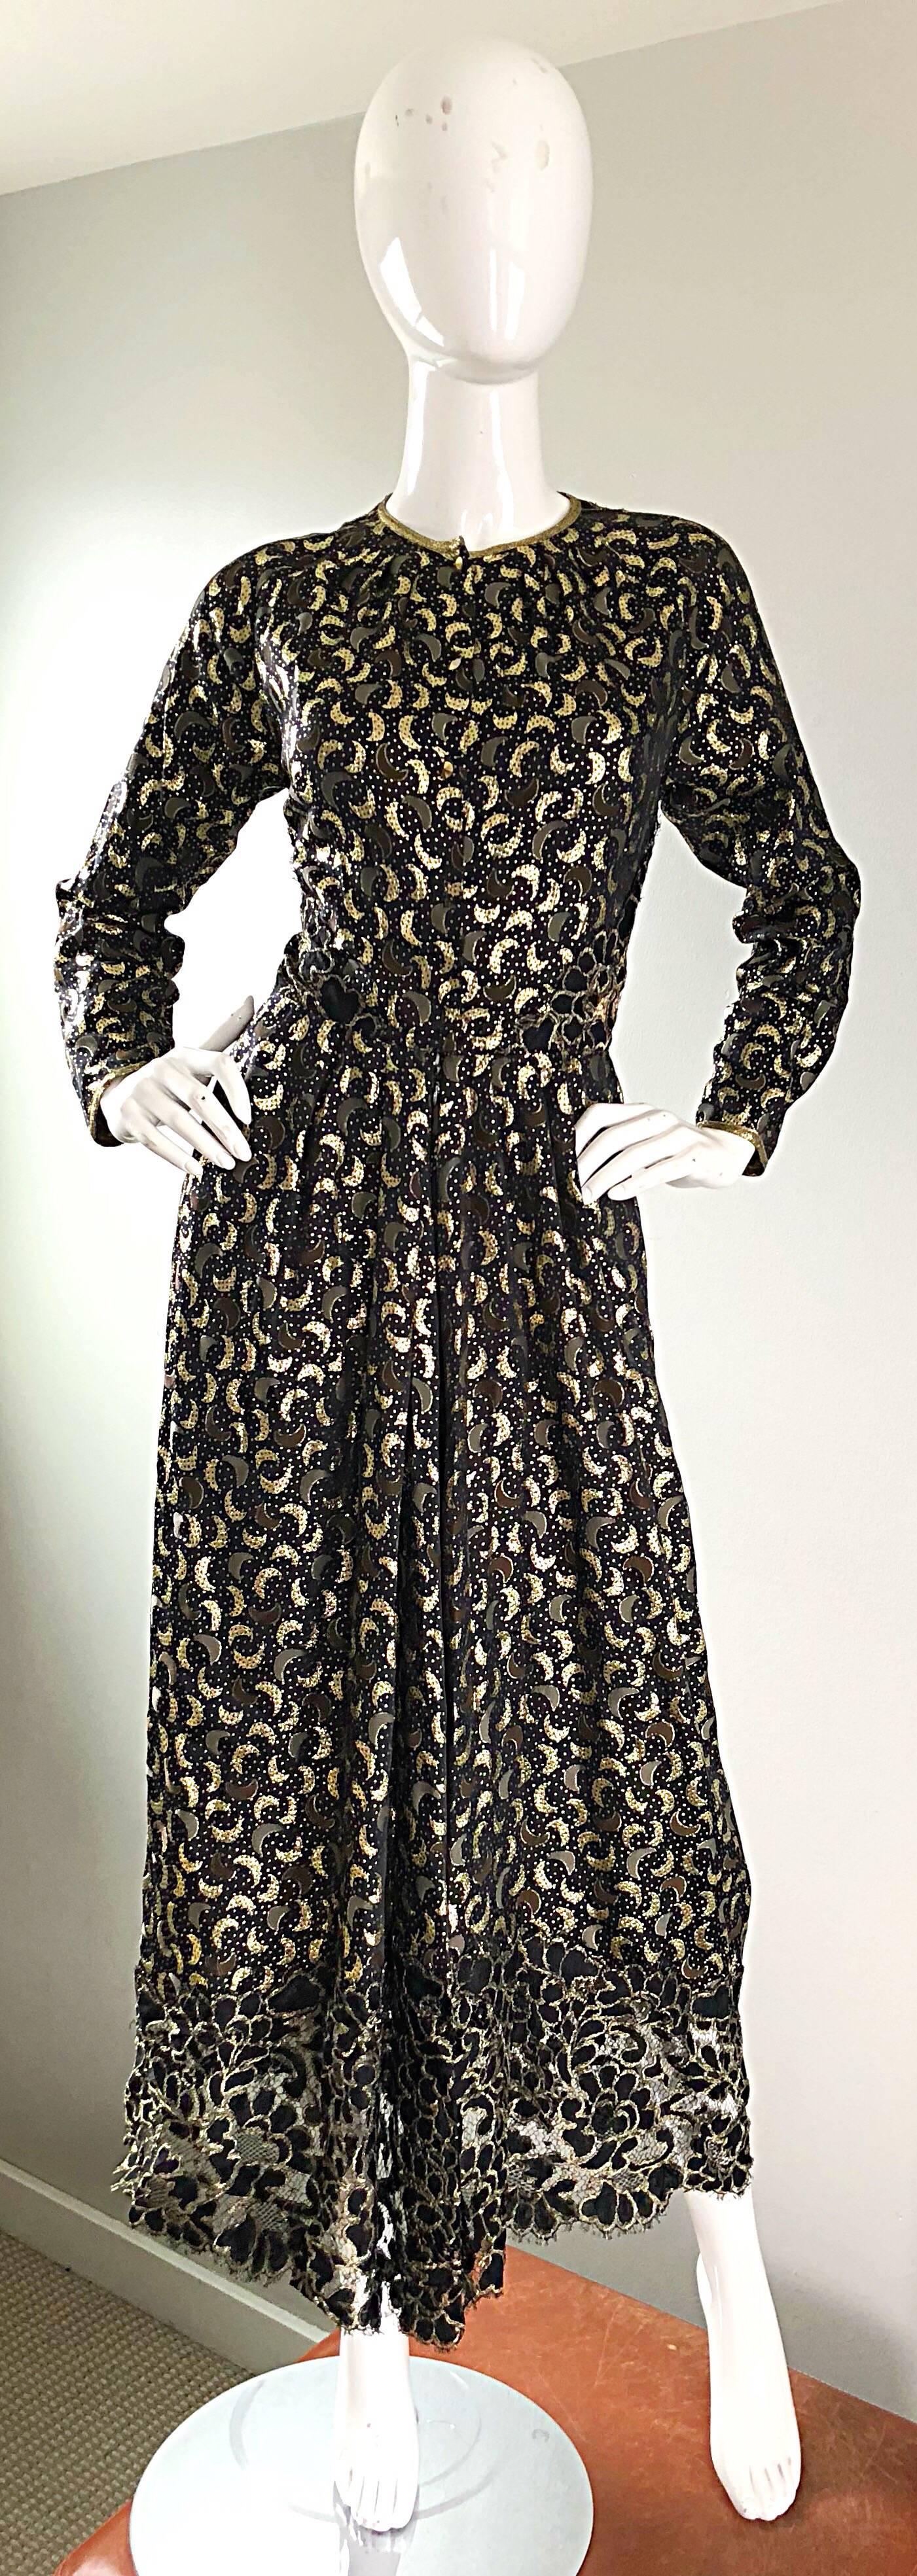 Magical vintage 70s GEOFFREY BEENE black and gold silk lame 'moon' print gown! There is so much hand-crafted detail to this couture quality gem! Features an elegant, yet fun gold crescent moon print throughout. Lace hem and back are lined with semi